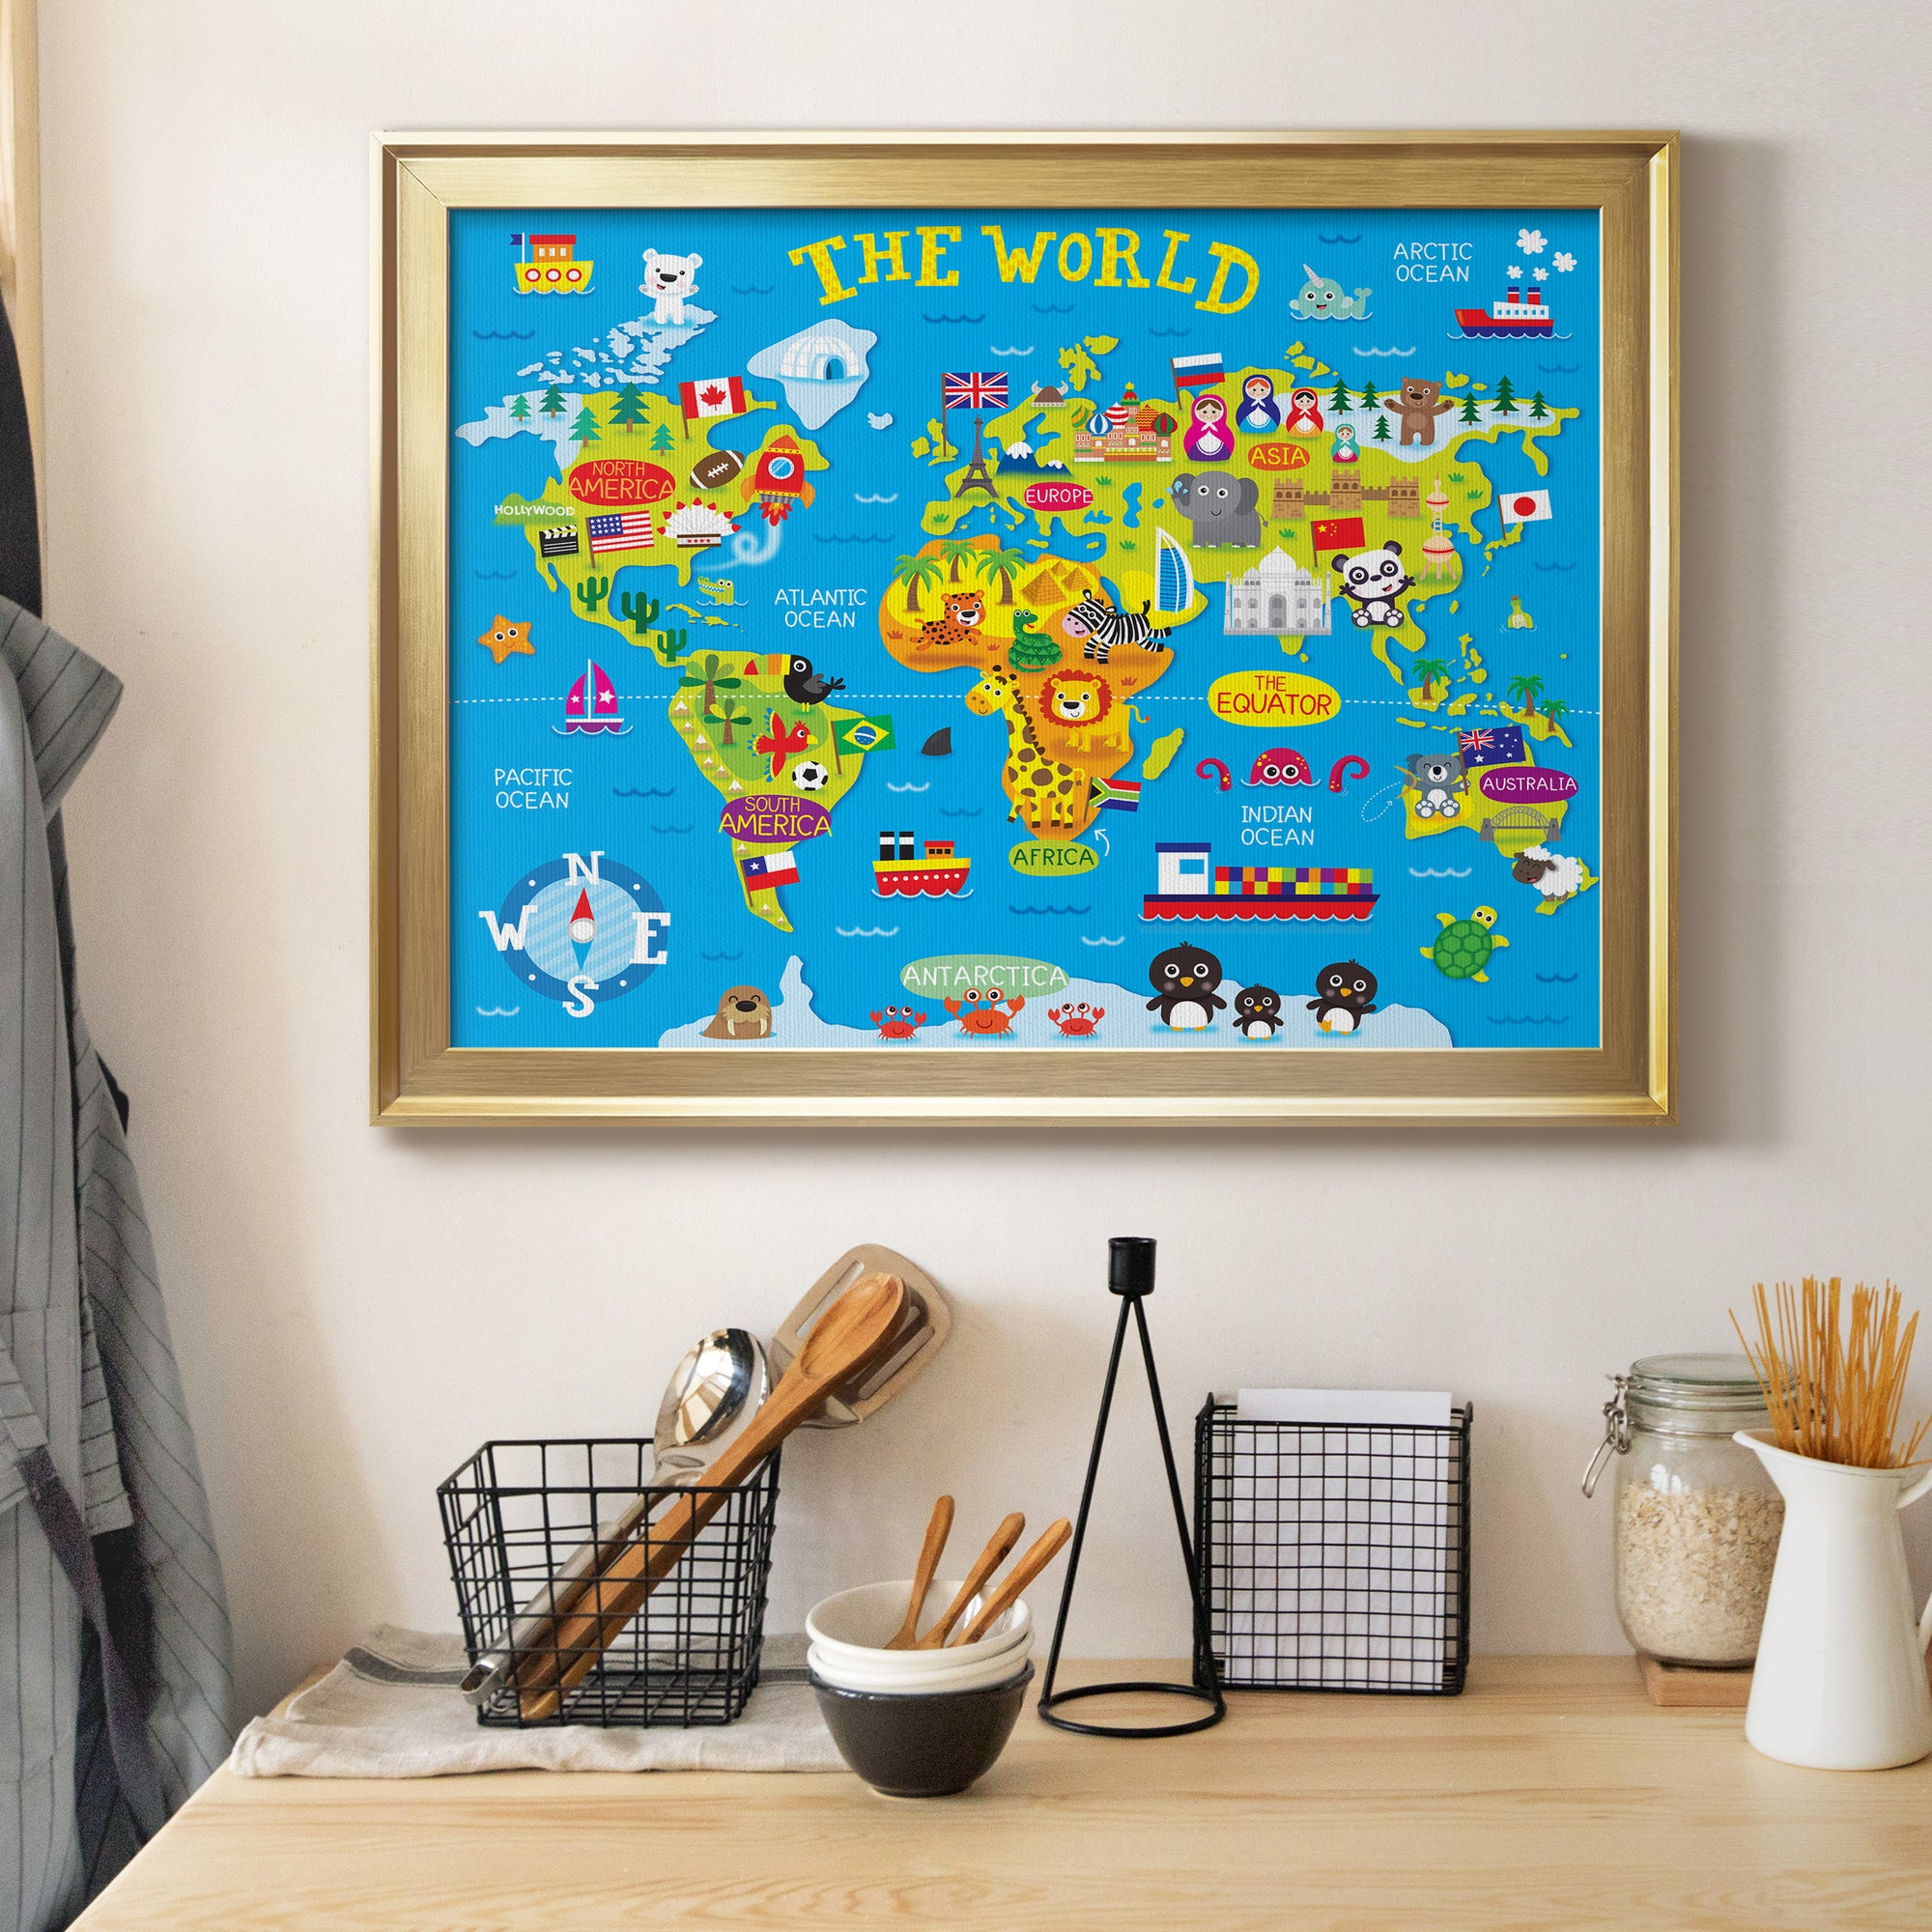 World Map Premium Classic Framed Canvas - Ready to Hang